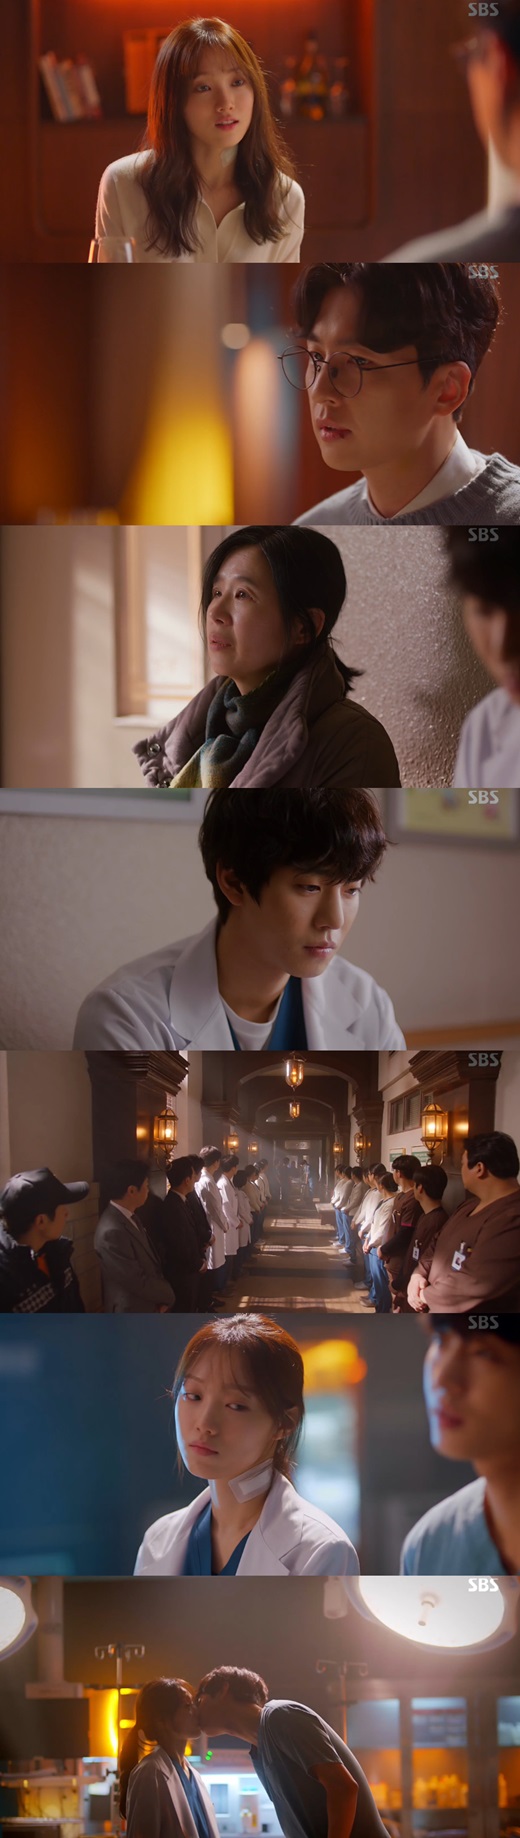 Lee Sung-kyung, a romantic doctor, decided not to leave Doldam Hospital.SBS Mon-Tue drama Romantic Doctor Kim Sabu 2 broadcasted on the night of the 28th, the doctors facing various emergency patients were drawn.Cha Eun-jae (Lee Sung-kyung) was saddened to see his wife, who killed her husband due to domestic violence, eventually being taken to the police. Kim Sa-bu (Han Seok-gyu) said, Get it off quickly.Its not your fault, she said with a short consolation.The paramedics, which were unconscious by Weapon number patients and drunks, were then brought in at the same time.Cha Eun-jae was in a vain heart when he saw the Weapon number without the will of life.On the other hand, Kim was in a situation where he had to make a brain death judgment to The paramedics, which is difficult to save even by surgery, and apologized to The paramedics mother, I am sorry that there is nothing I can do.The mother of The paramedics showed Kim Sabu the United Network for Organ Sharing certificate and confessed, My daughter had this.While running to save the Weapon number, Cha was told by nurse Park Eun-tak (Kim Min-jae) that the blood type was the same as the patient who entered the brain death judgment.A brain death commission was later held in hospital; eventually the patient was pronounced dead of brain death and Cha Eun-jae proposed United Network for Organ Sharing.But Seo Woo-jin (Ahn Hyo-seop) was angry, saying, My daughter died of brain death - how do you tell her mother?The mother of The Paramedics tried to cancel the United Network for Organ Sharing after hearing the two peoples stories.However, I changed my mind again after hearing the sad story of Weapon number from Weapon numbers mother.After the surgery, Cha Eun-jae told Yang Ho-joon (Go Sang-ho) I will not leave the hospital. I have done nothing wrong except hard work. Why do you go to another hospital?Do not tell me to leave. 